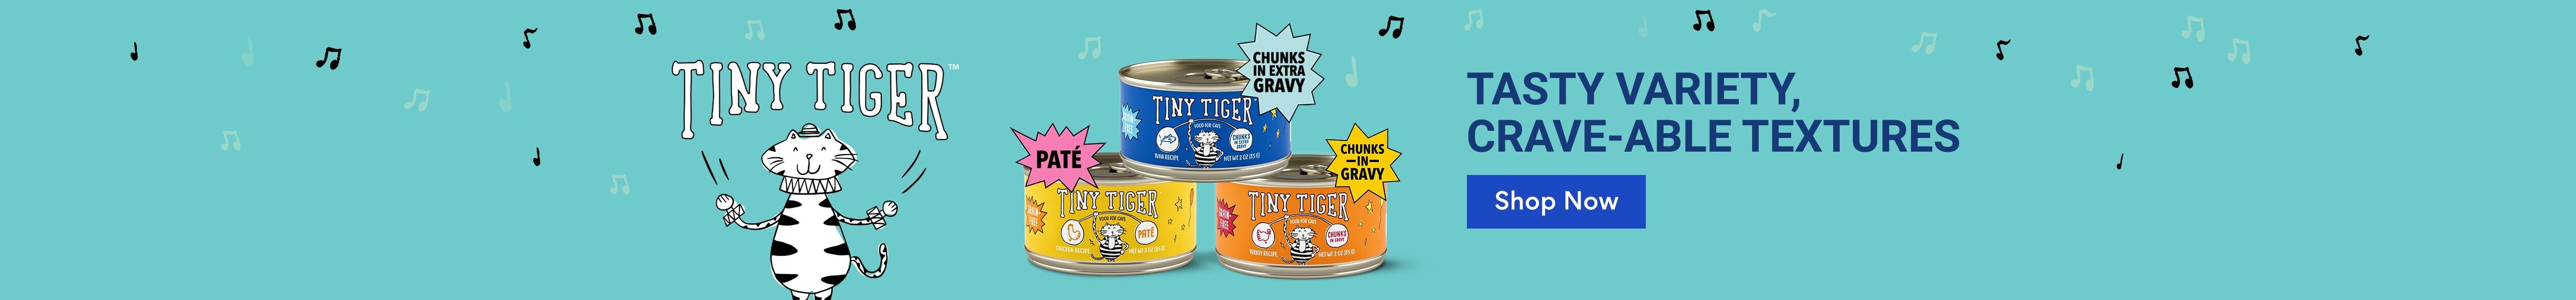 Tiny Tiger Tasty Variety, Crave-able Textures Shop Now